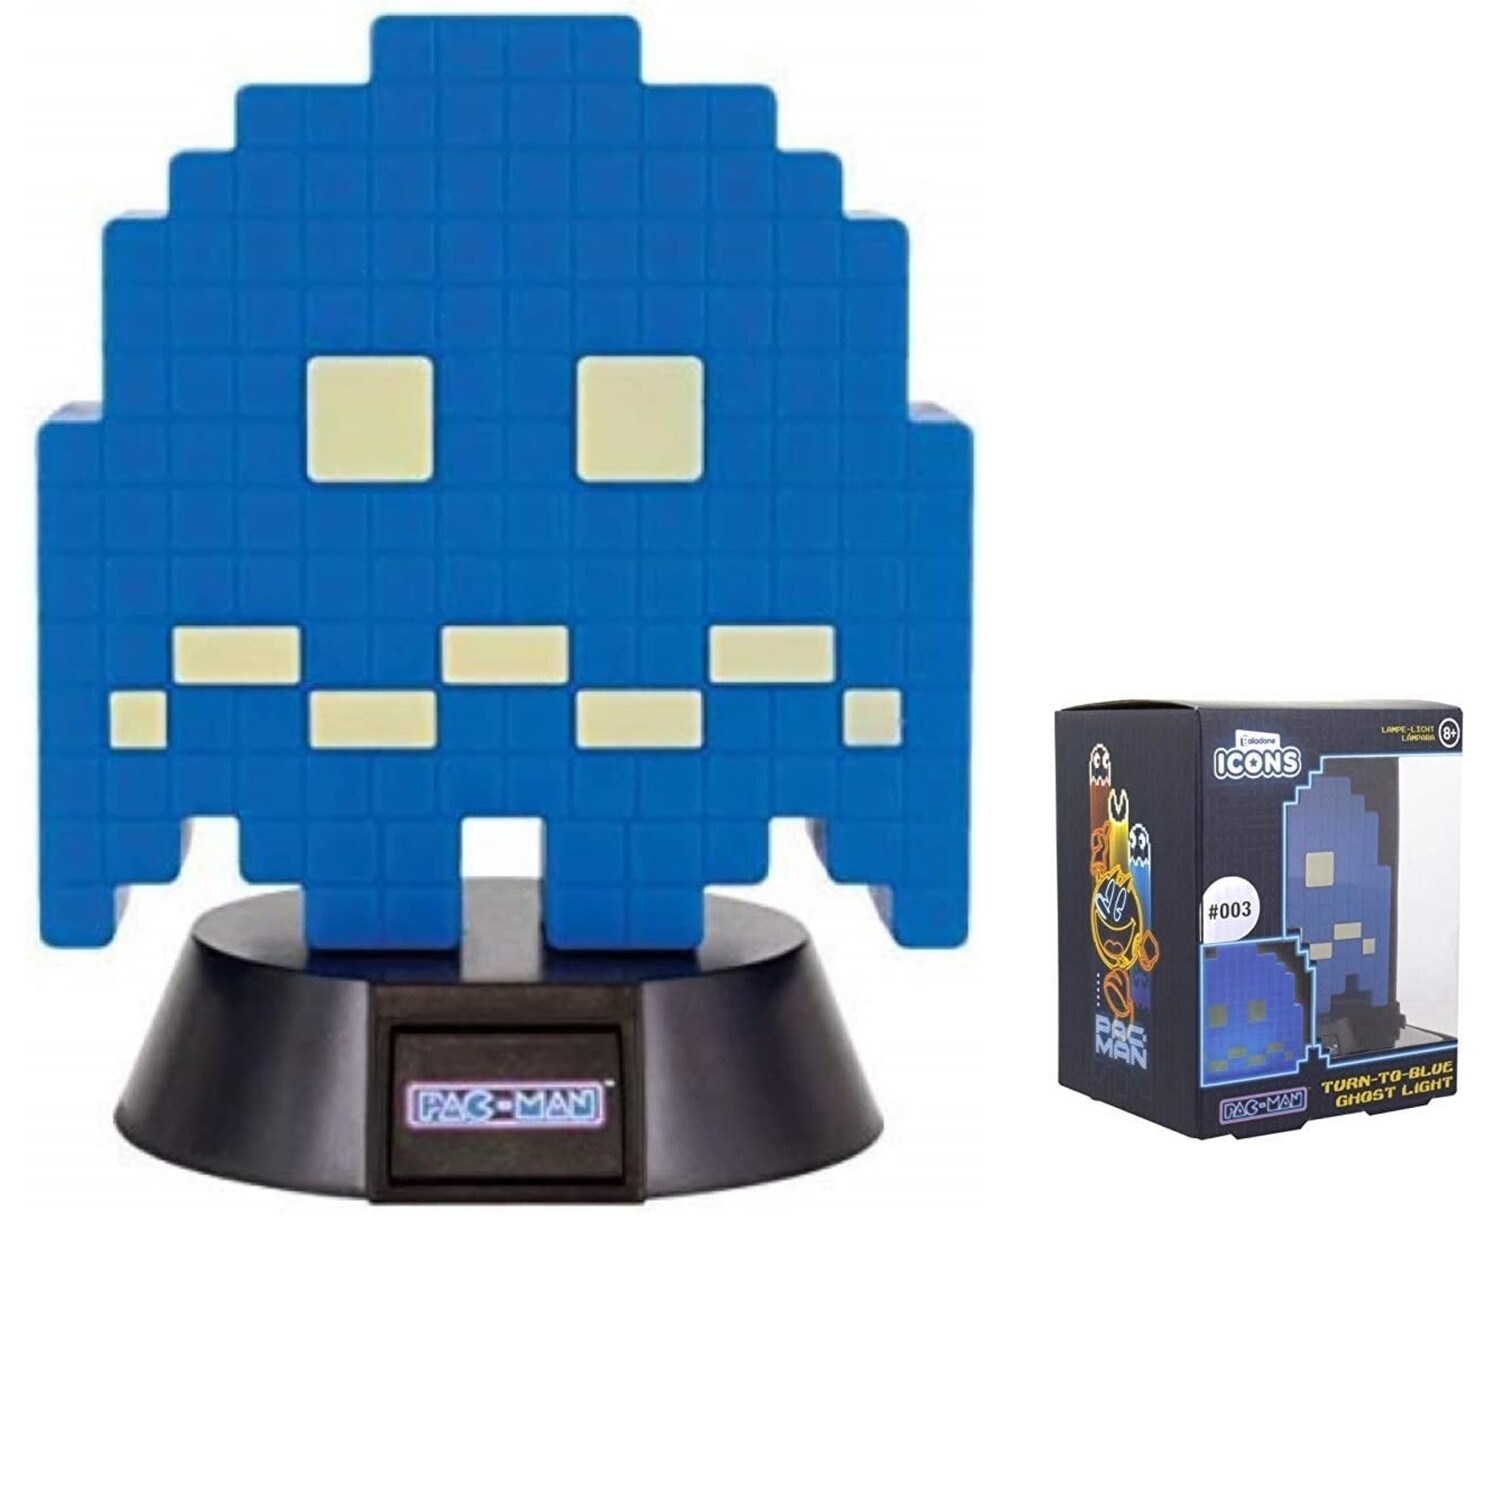 Turn-To-Blue-Ghost (Pac-Man) #003 LED Light